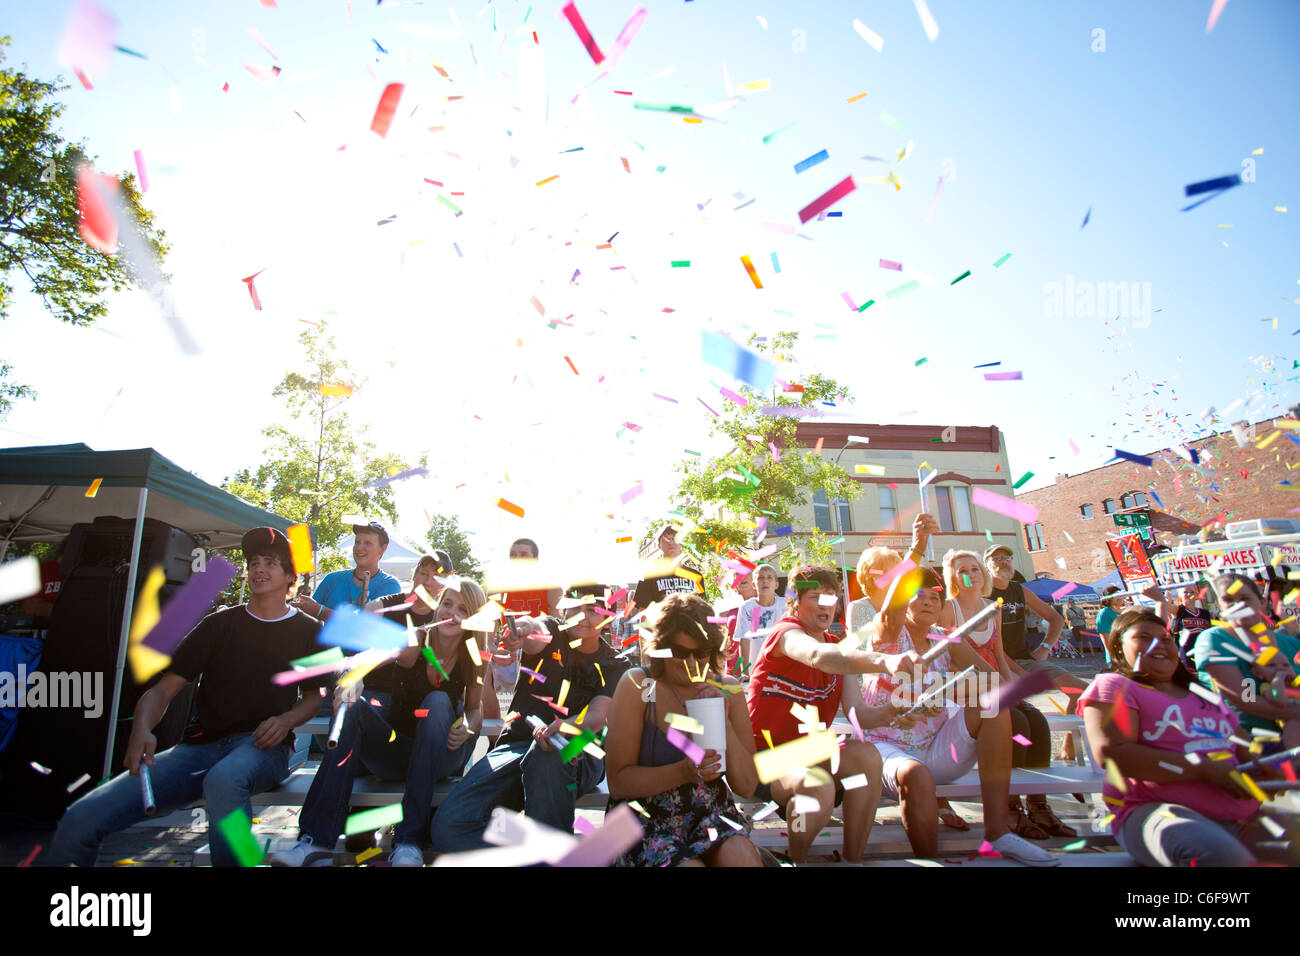 A group of people launch confetti into the air during a festival kick-off ceremony in Rogers, Arkansas. Stock Photo